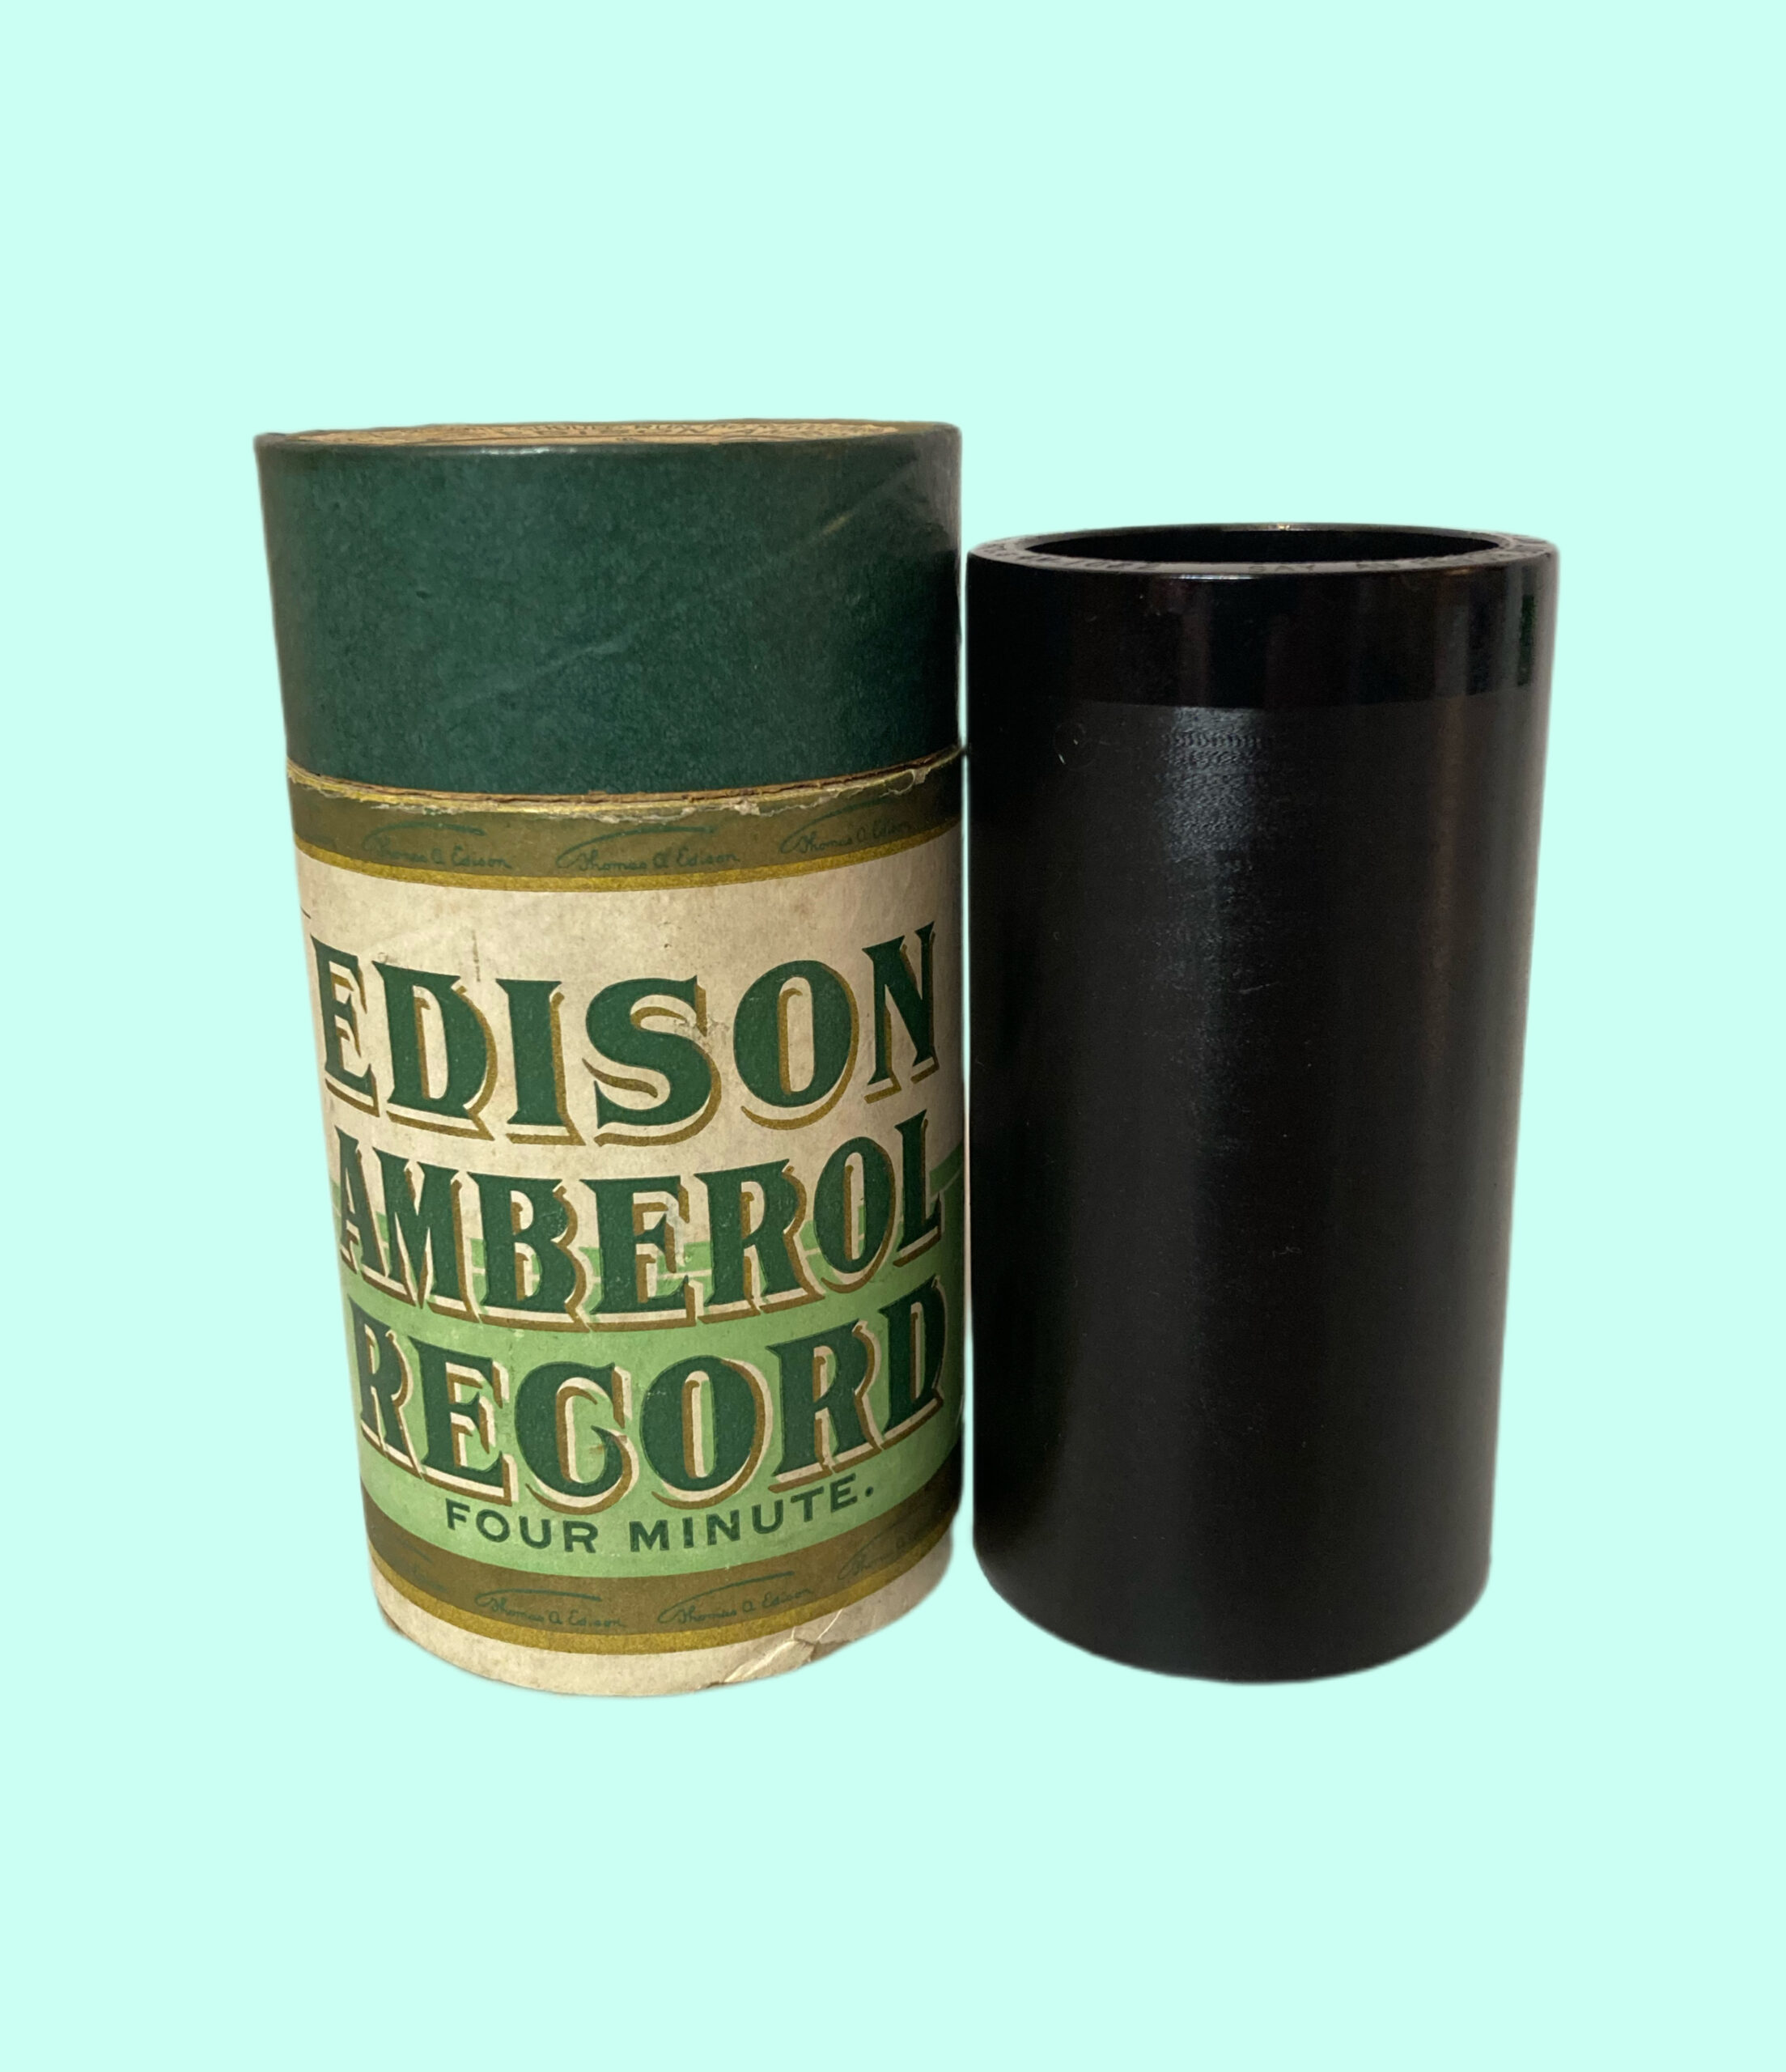 Edison 4 min. Cylinder… “ The Riches of Love“